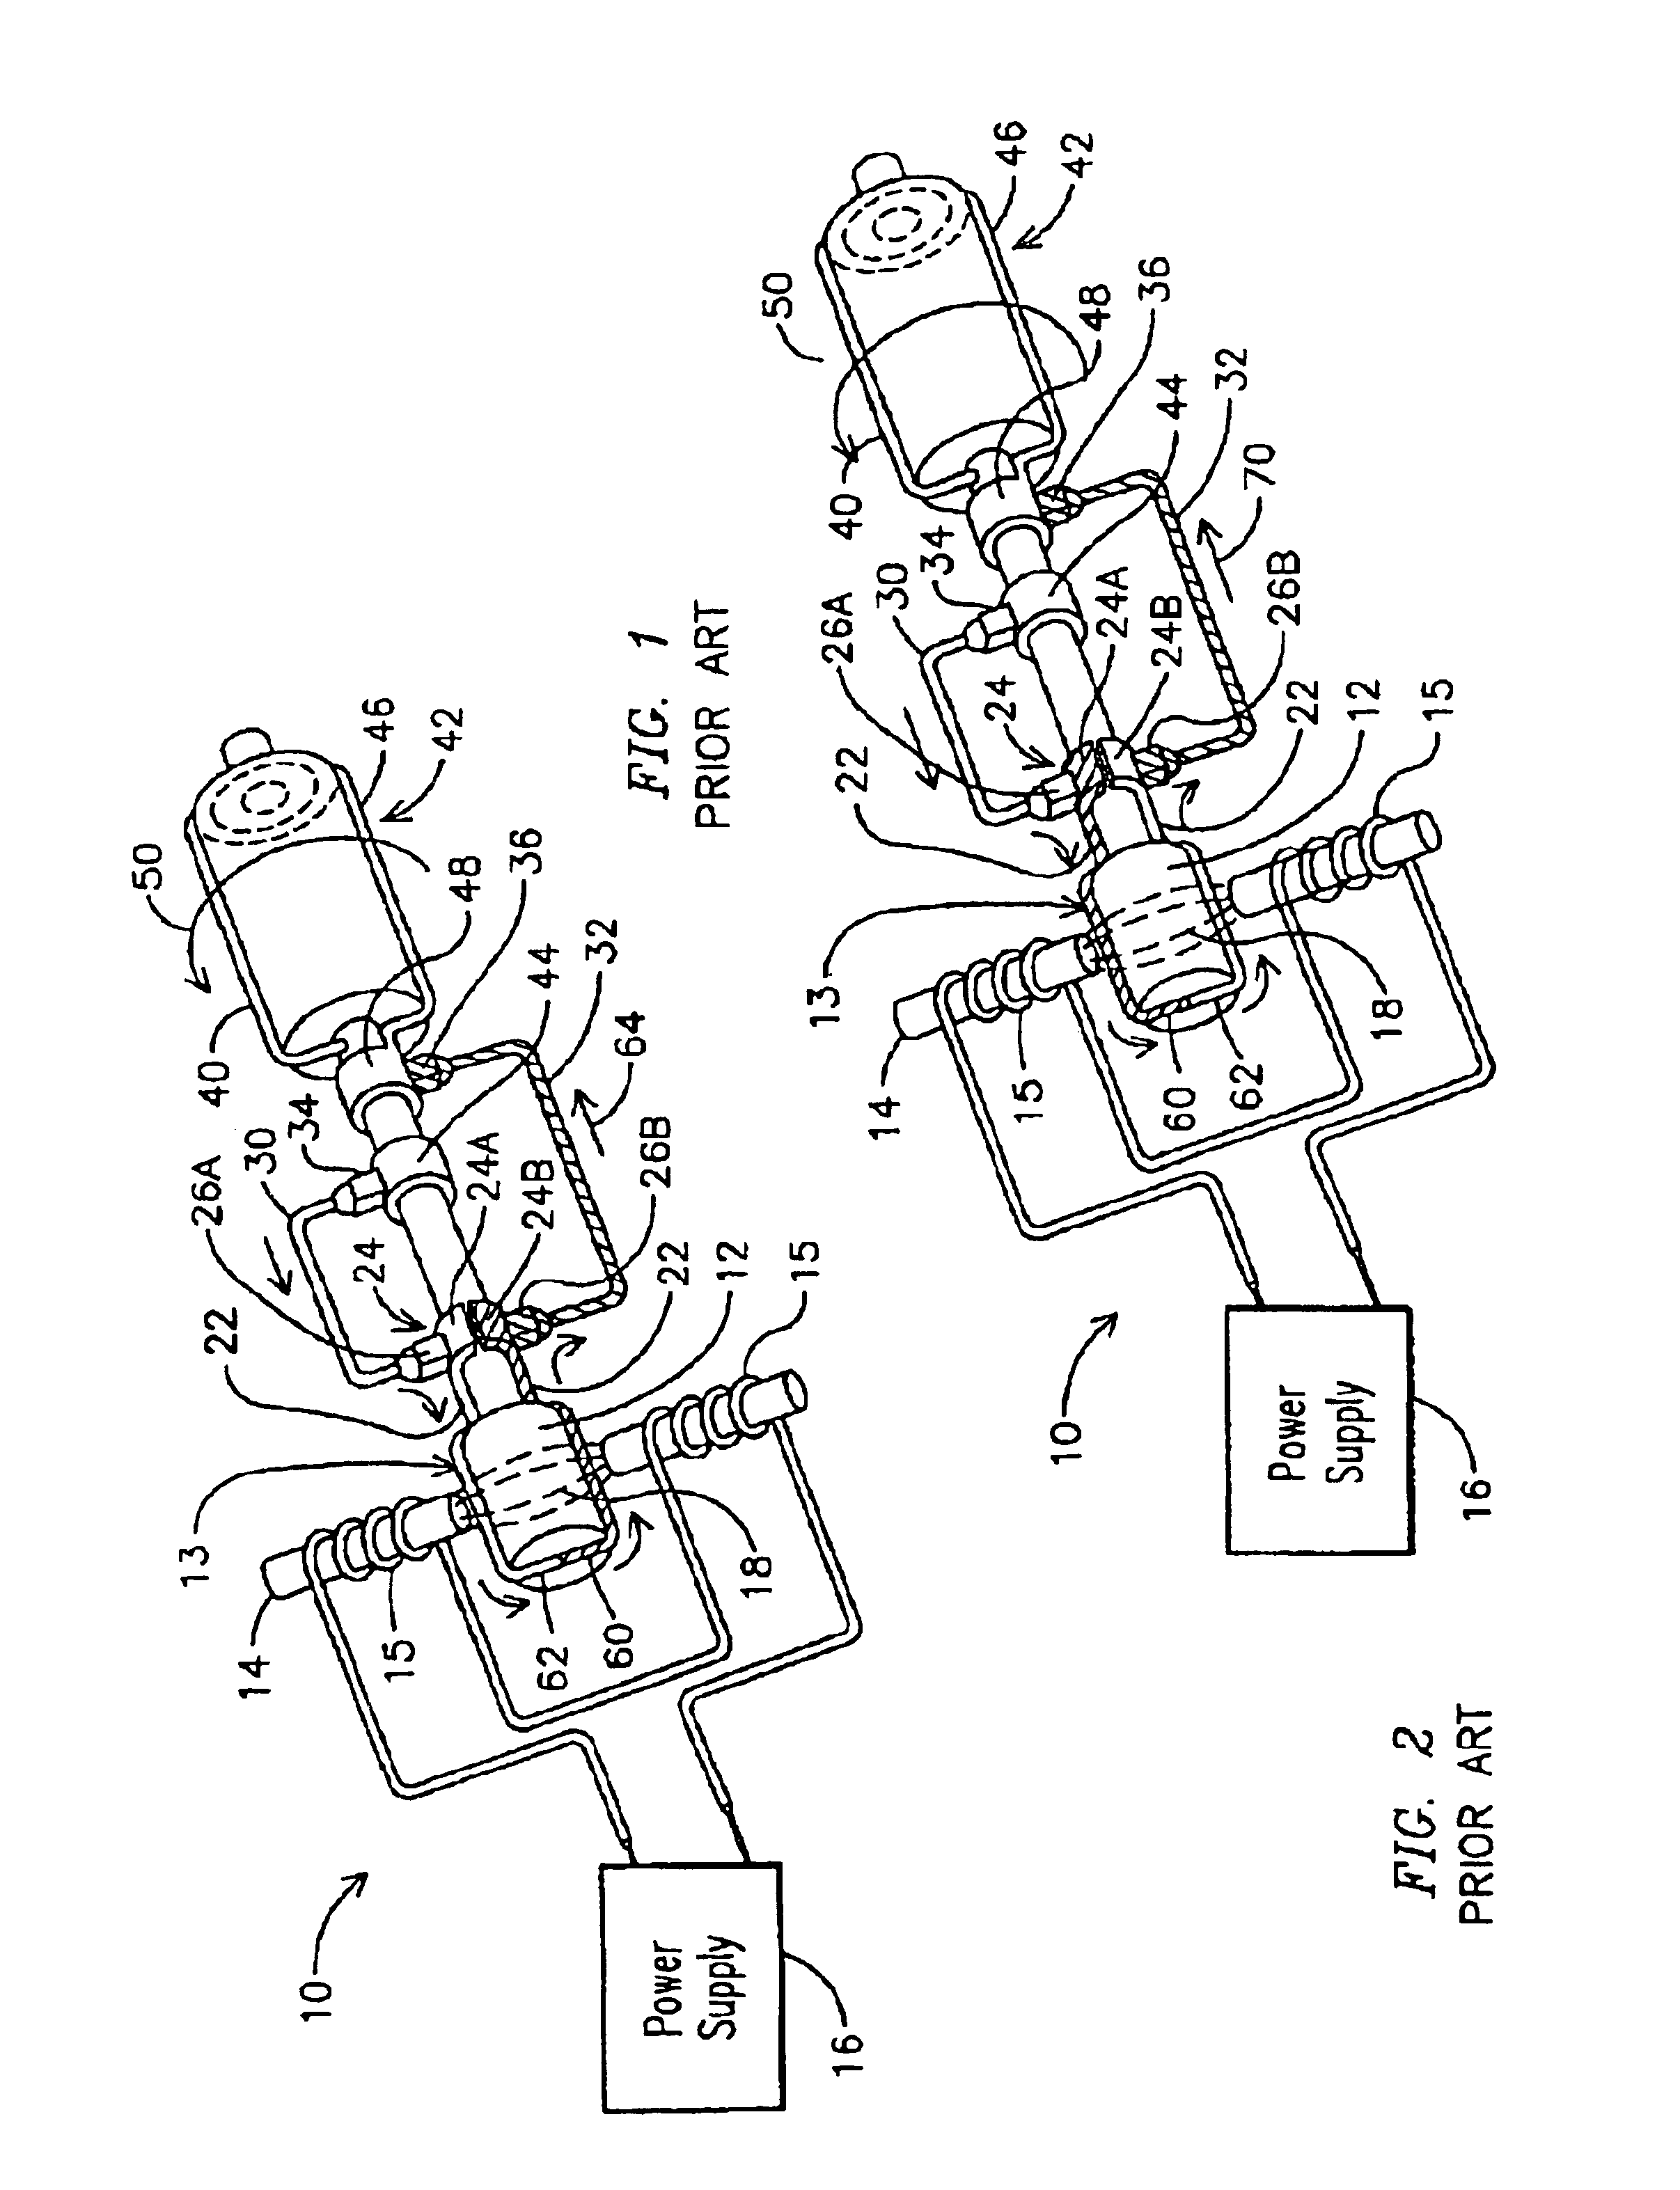 Brush holder for dynamoelectric machines